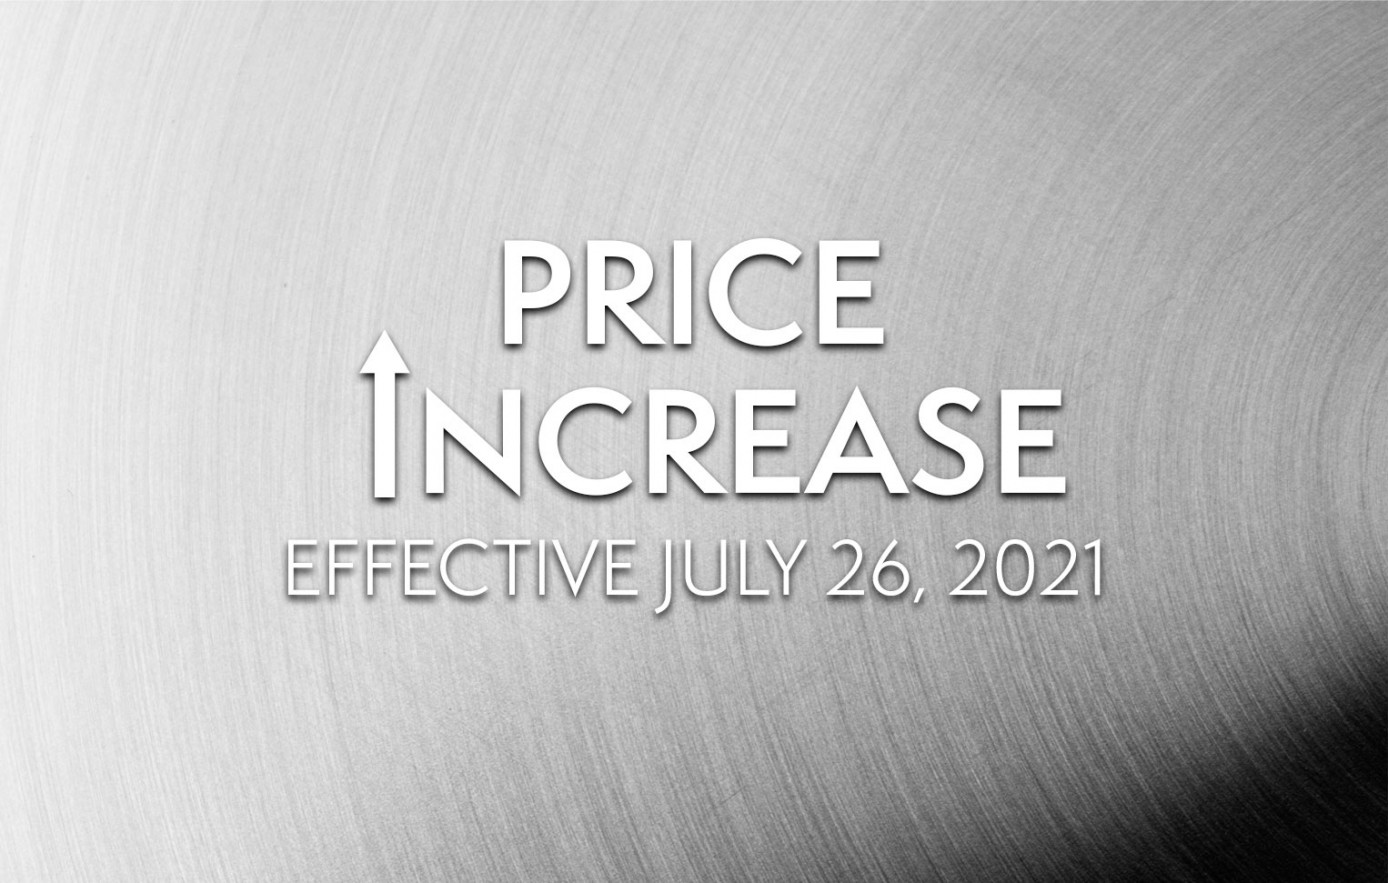 Price Increase Effective July 26, 2021